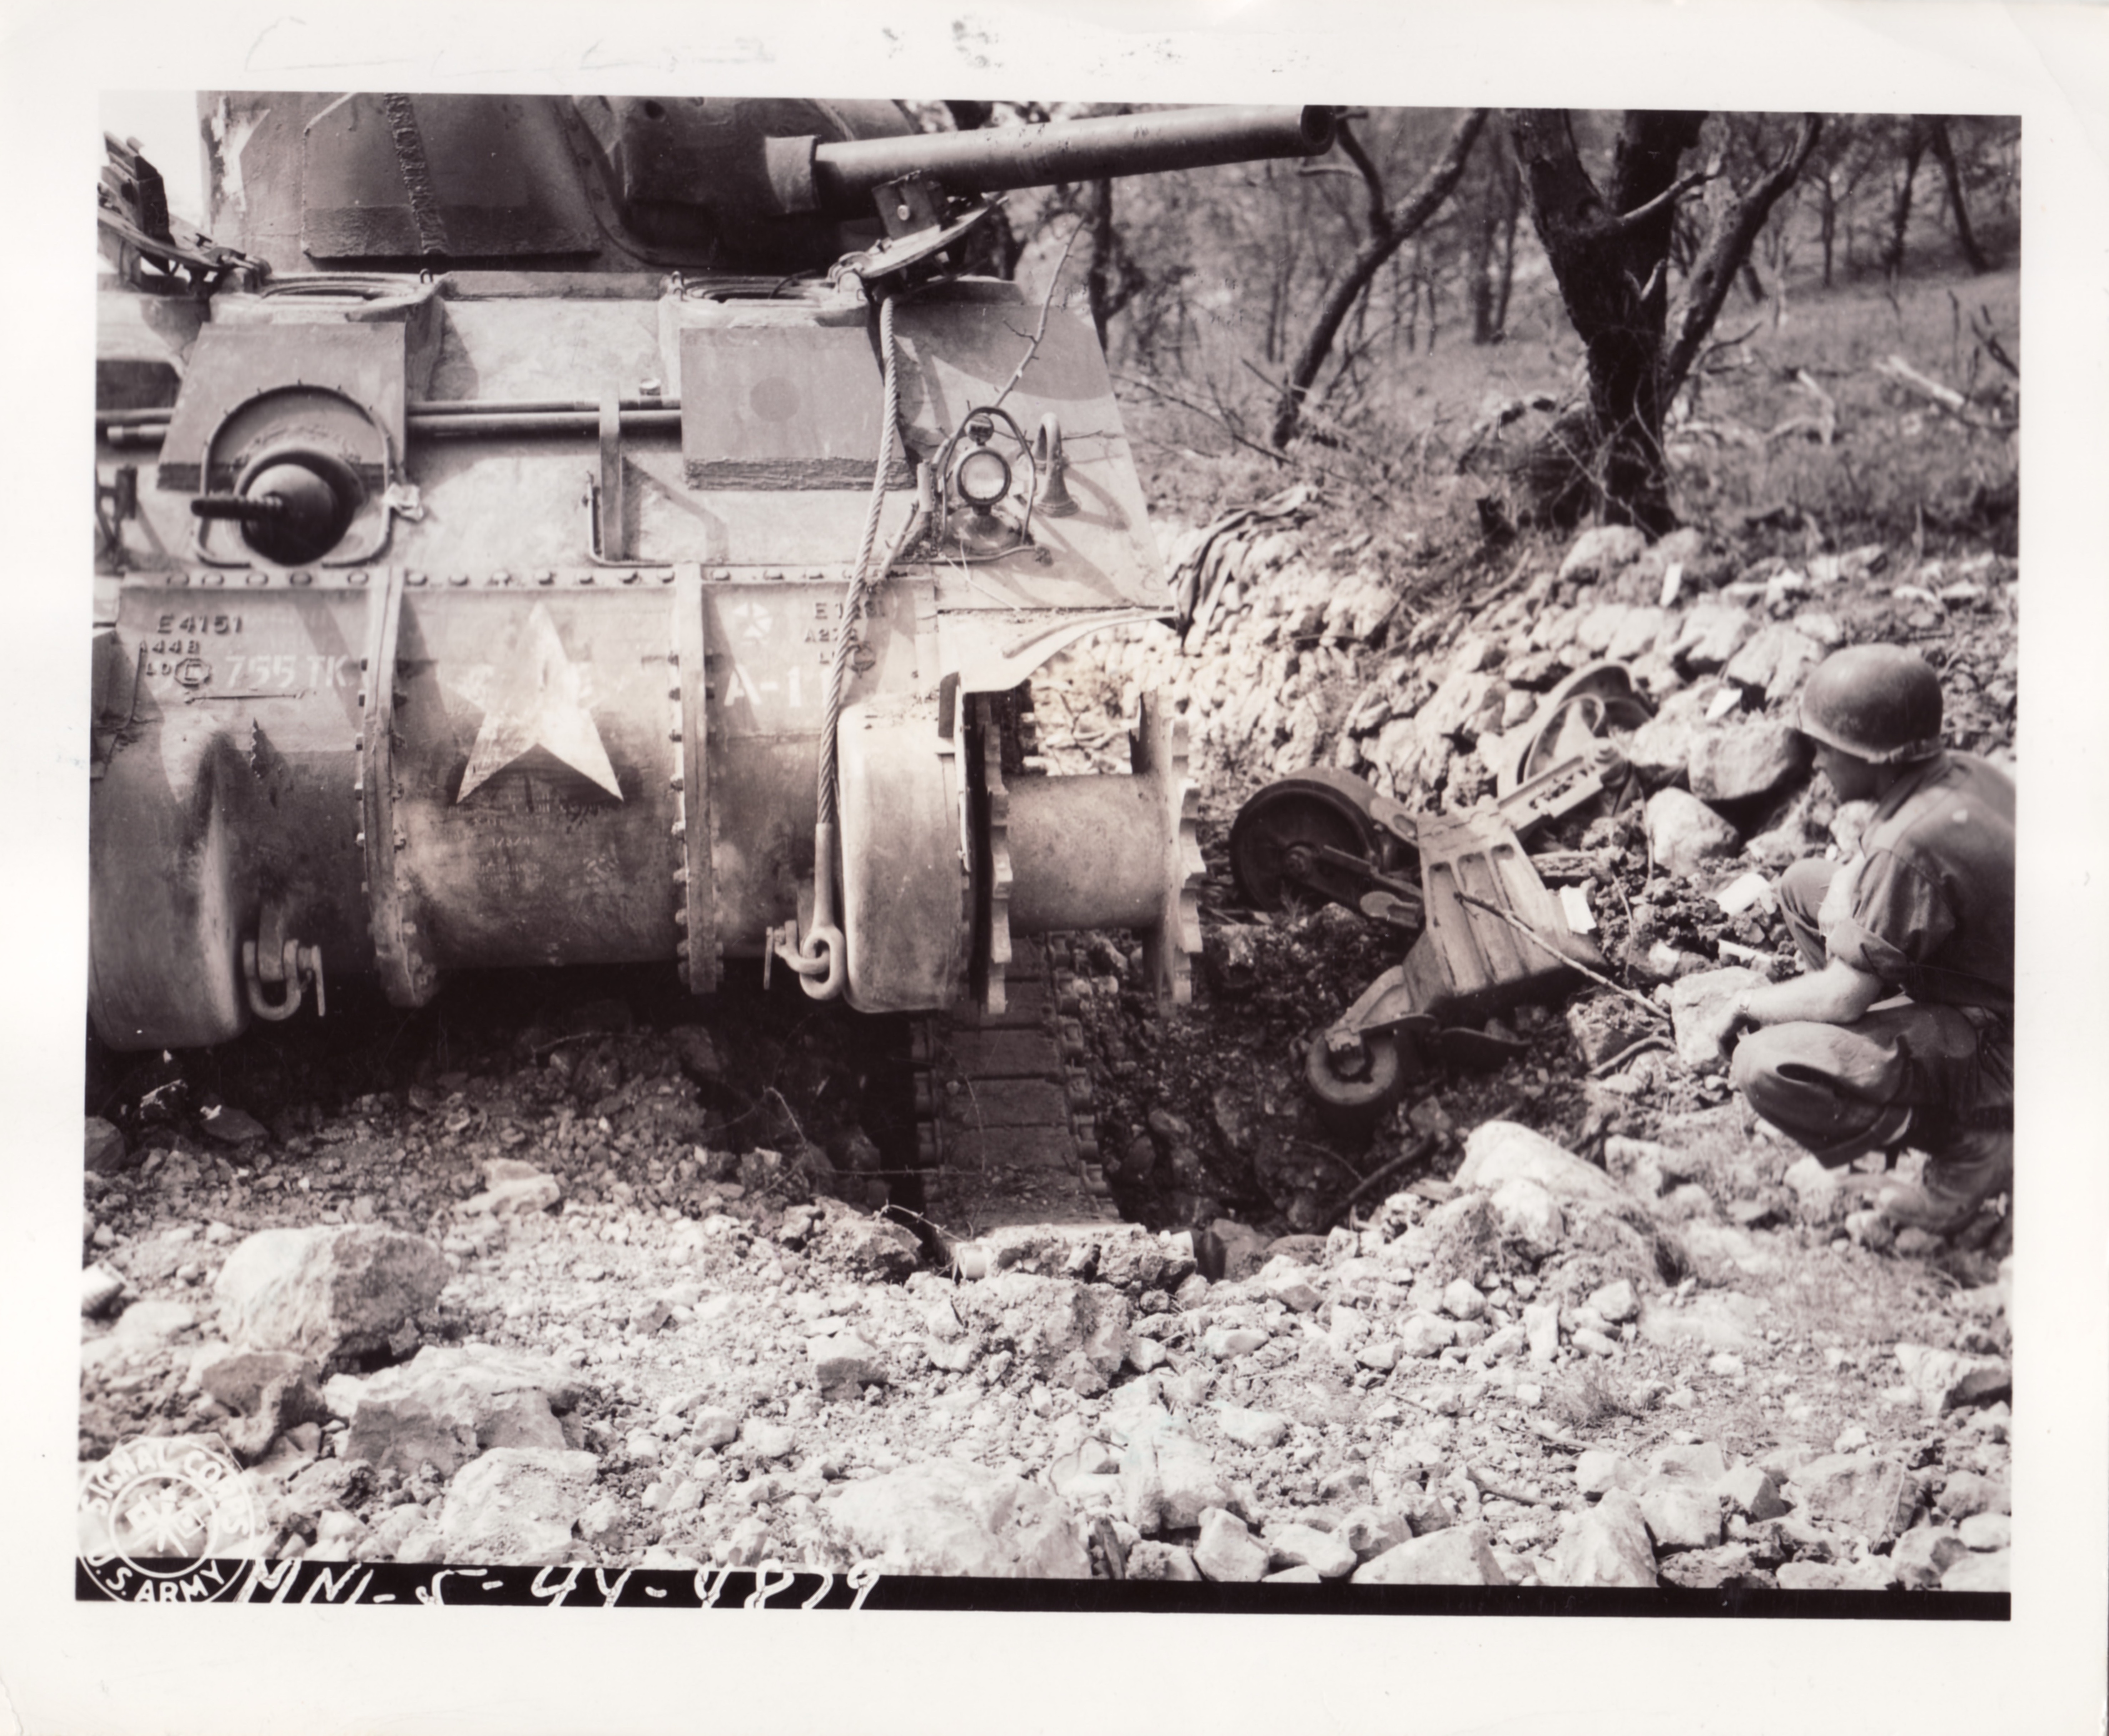 <p class='eng'>13 MAY 1944 MM-5-44-4879<br />FIFTH ARMY CASTLEFORTE AREA, ITALY<br />MEDIUM TANK TREAD BLOW OFF BY MINE.<br />SOLDIER IS SGT. MAX CAMPBELL (LOS ANGELES, CALIF.) APS. PHOTOGRAPHER.<br />PHOTO BY ROONEY<br />163RD SIGNAL PHOTO CO.<br /><br />Note - Campbell, who saw combat during the Sicilian Campaign, was later reassigned to the 3131st Signal Service Co. He died of wounds in October 1944 in the town of Monghidoro (from "The Last Farewell - A Journey of the Heart").</p>